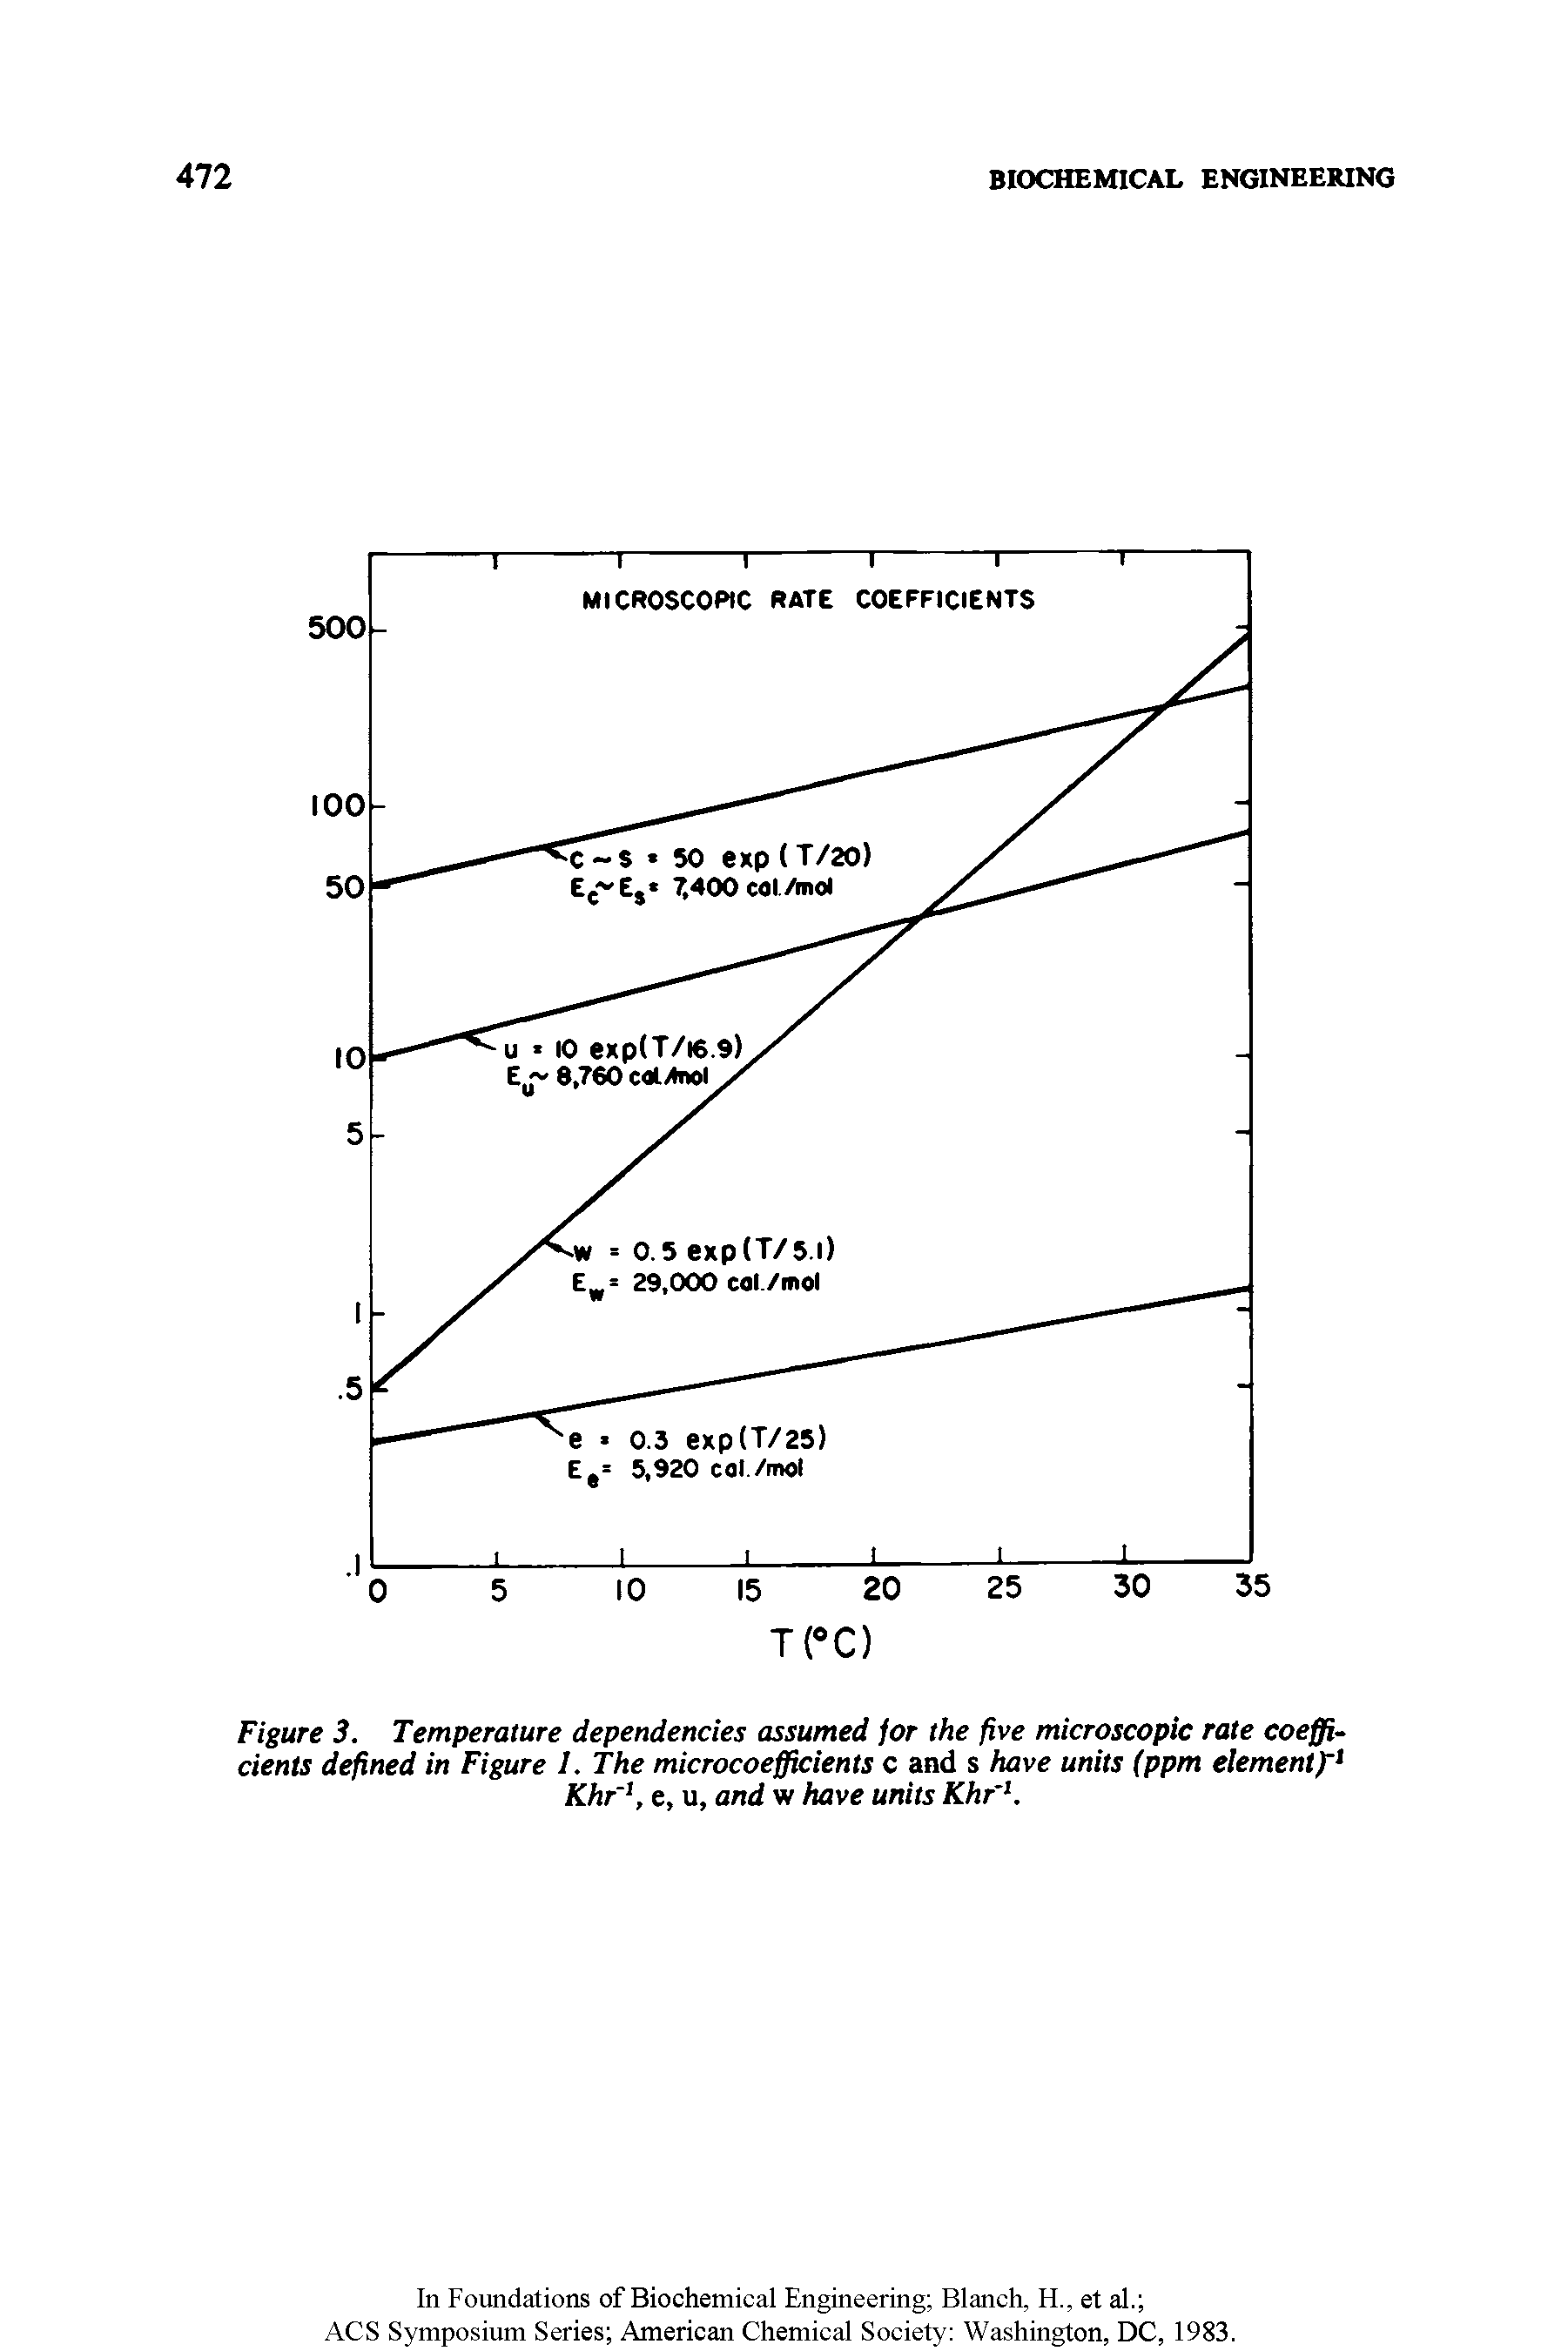 Figure 3. Temperature dependencies assumed for the five microscopic rate coefficients defined in Figure I. The microcoefficients c and s have units (ppm elementfr Khr e, u, and w have units Khr K...